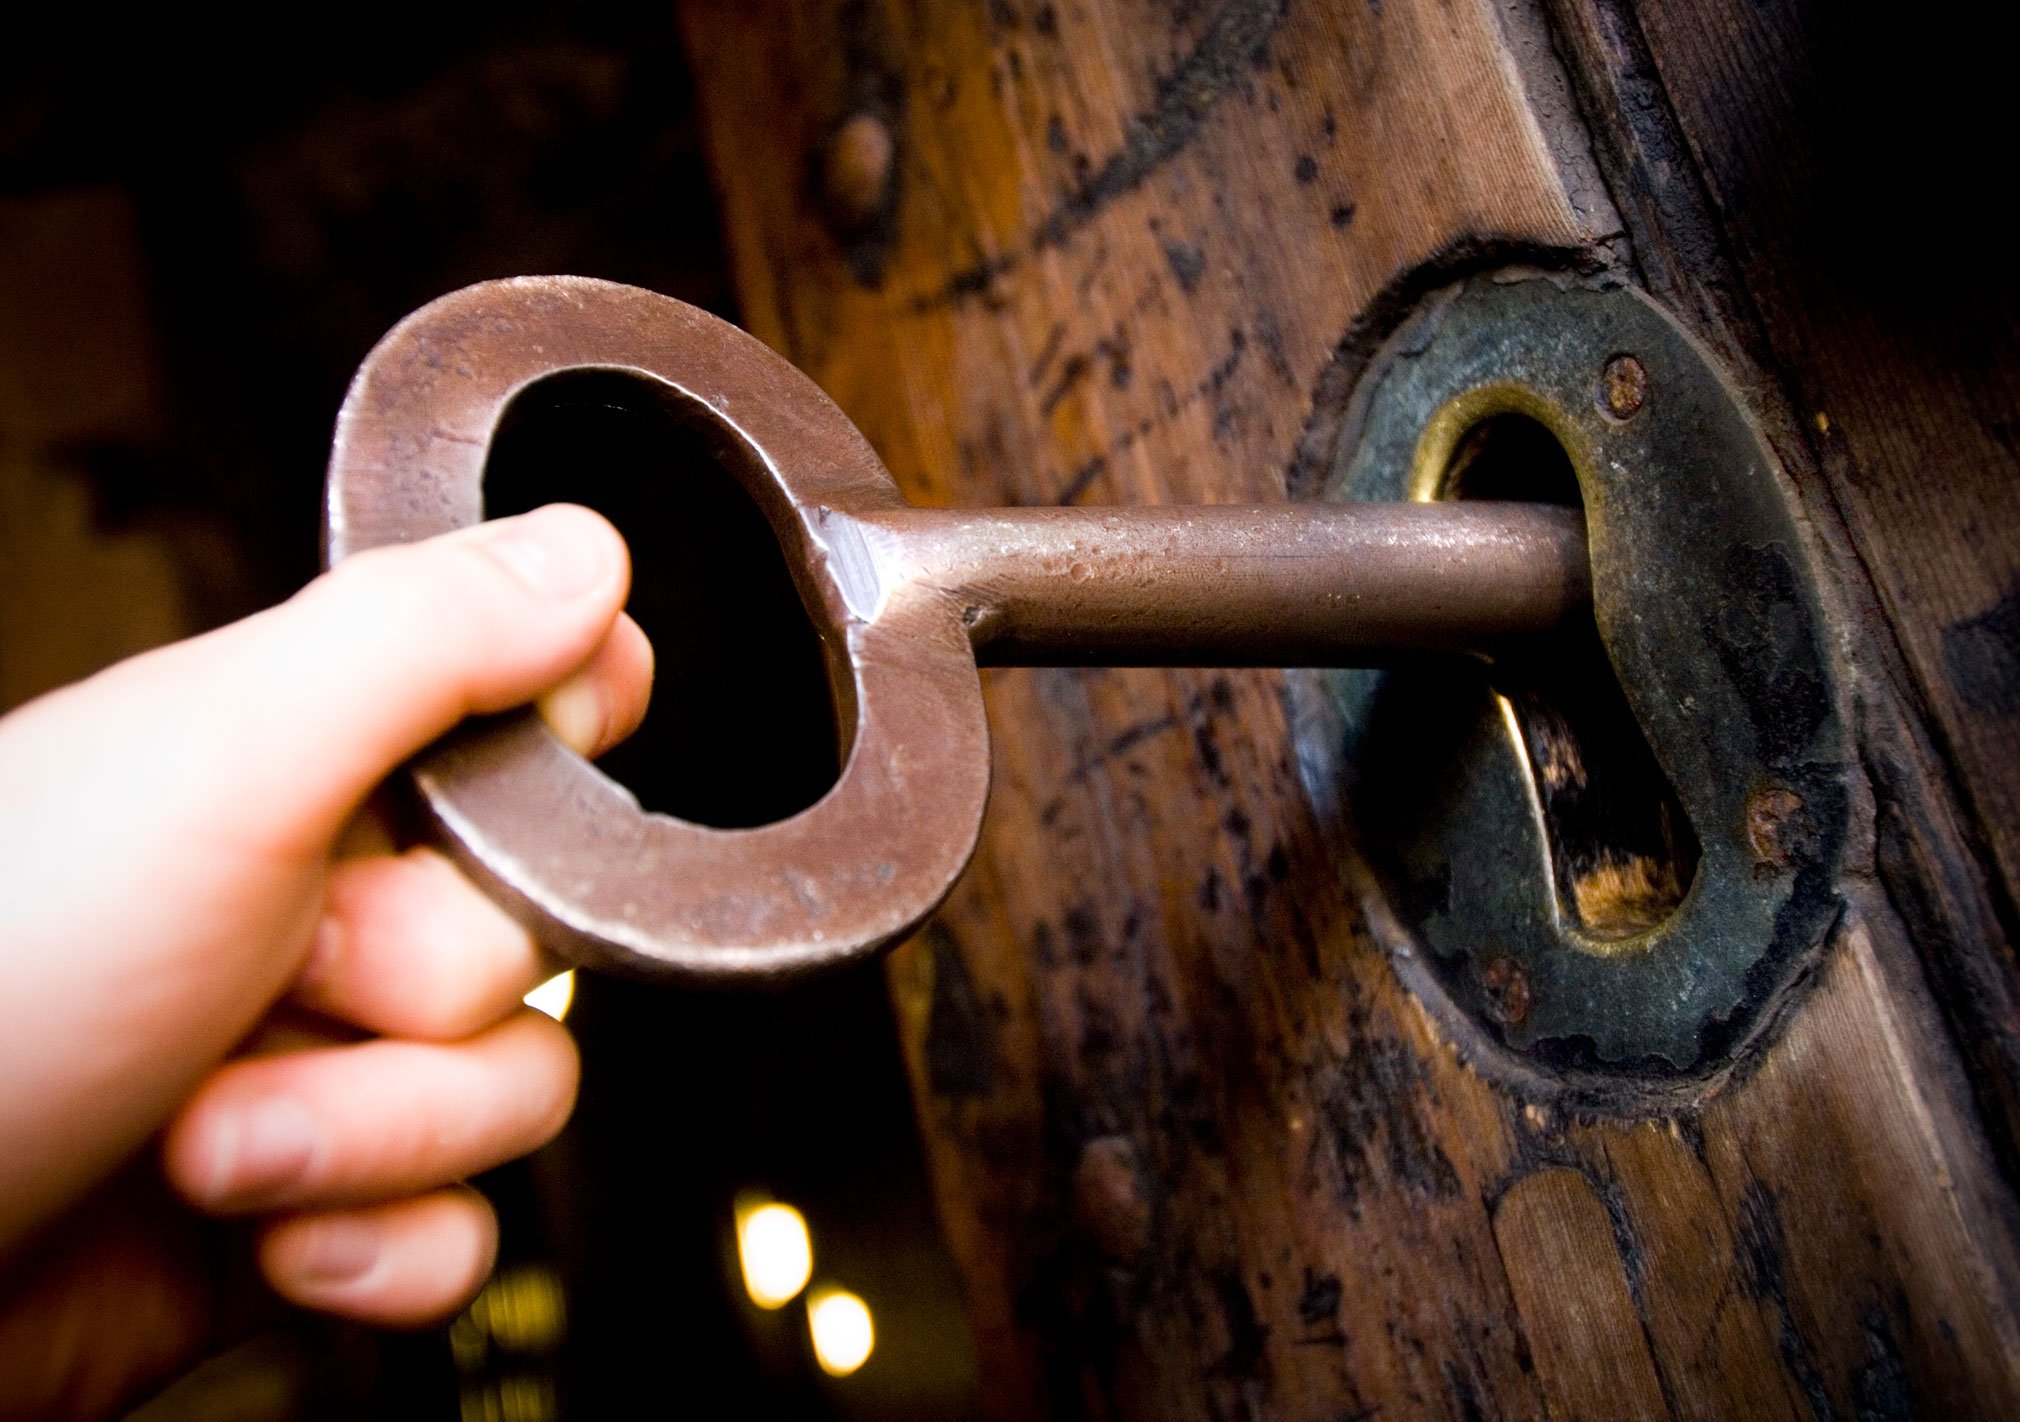 A child's hand on a large old fashioned key in a castle door.